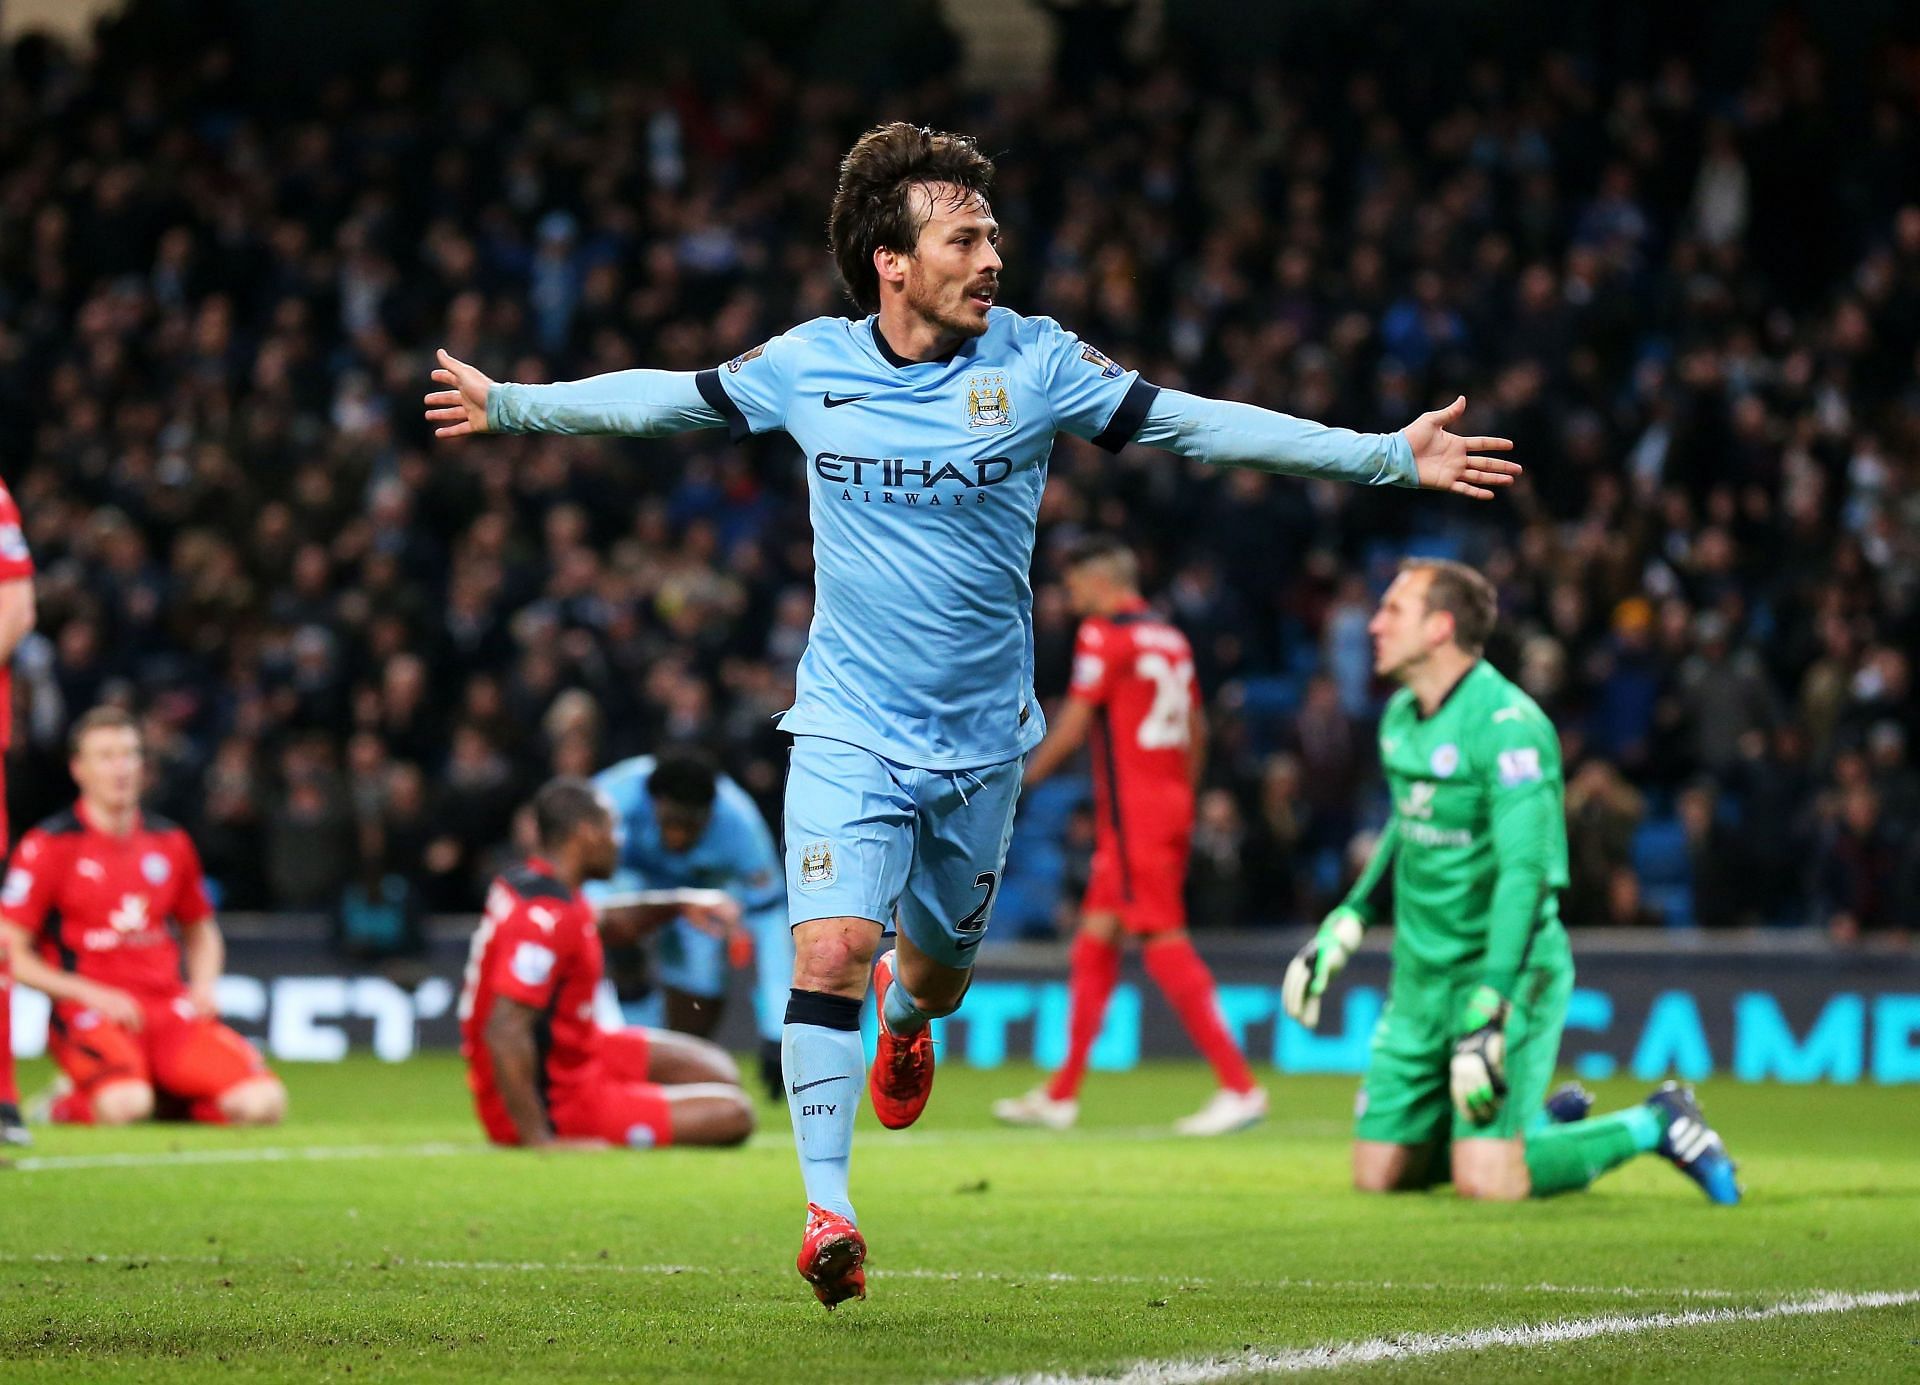 David Silva was a legendary signing for Manchester City.